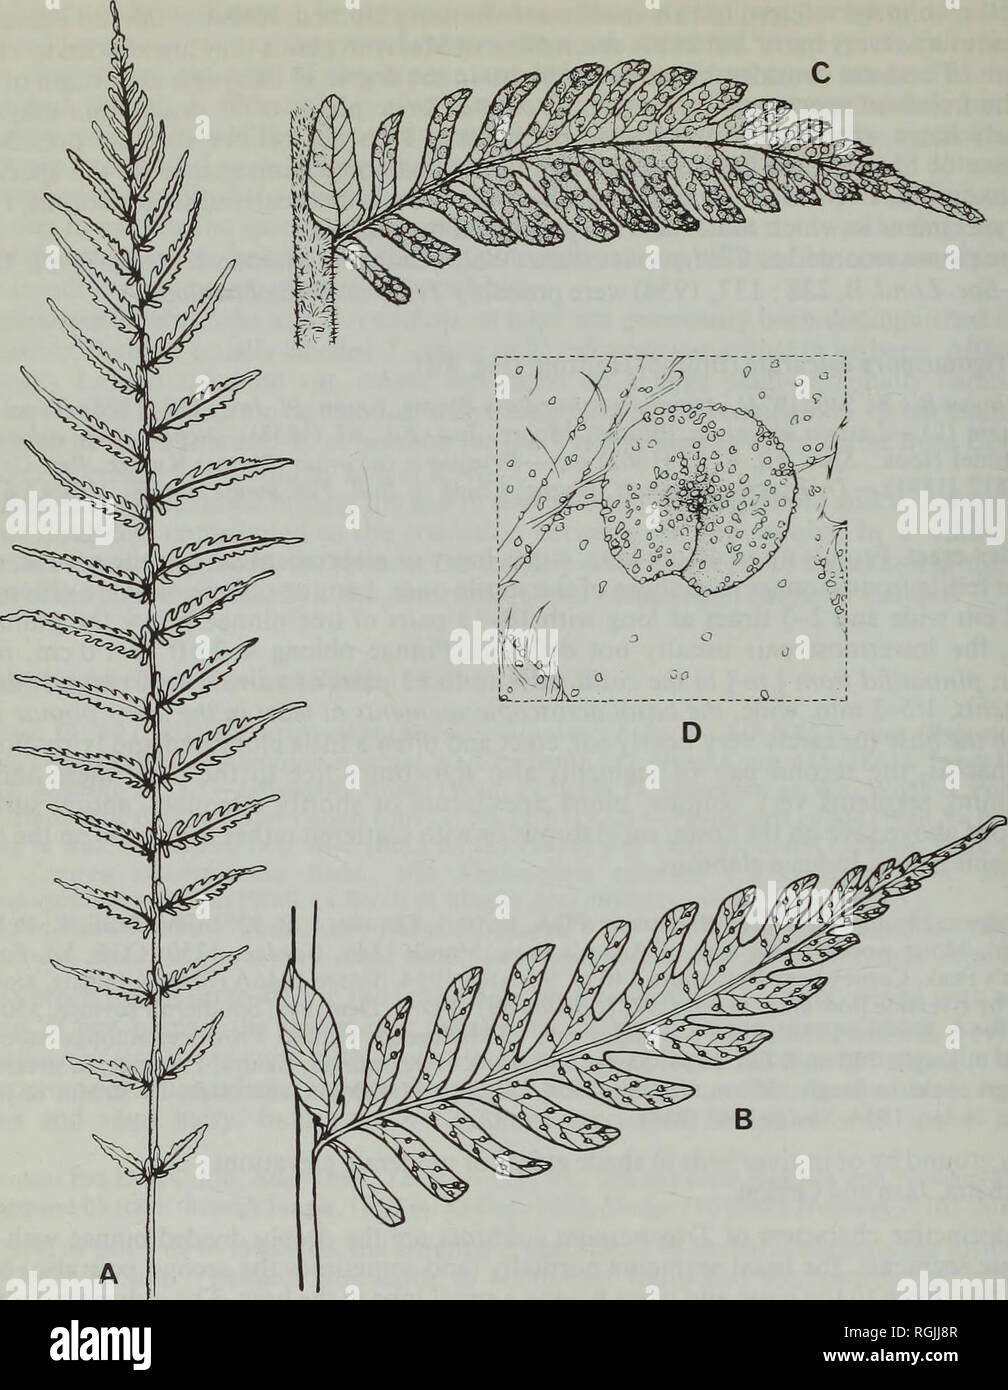 . Bulletin of the British Museum (Natural History) Botany. 22 W. A. SLEDGE. Fig. 4 A-Trigonospora angustifrons Sledge, frond (Sledge 1246, holotype), x05; B-T. calcarata (Blume) Holttum, pinna (Sledge 1042), x 2; C-T. glandulosa Sledge, pinna {Sledge 808, holotype), x 2; D-part of under surface of C, showing subsessile glands on lamina surface and indusium, x 30. considerably larger and more variable. The average length of the pinnae is twice that of Javan plants. Though such plants appear to be different they display all the essential characters which distinguish T. calcarata from other speci Stock Photo